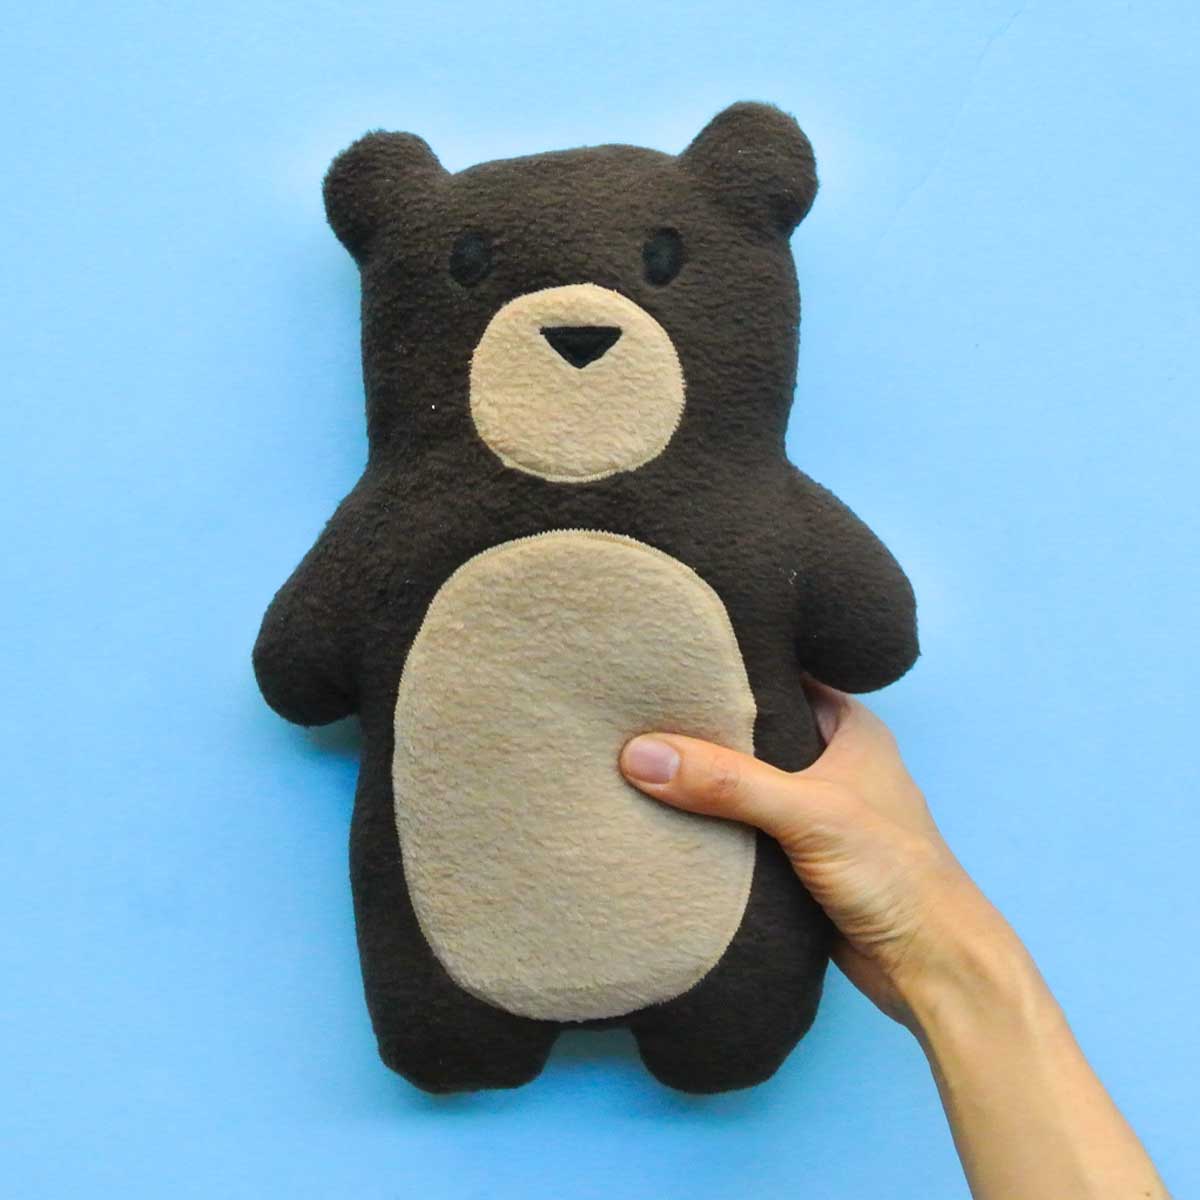 Finished DIY Homemade Plush Bear with Hands holding it